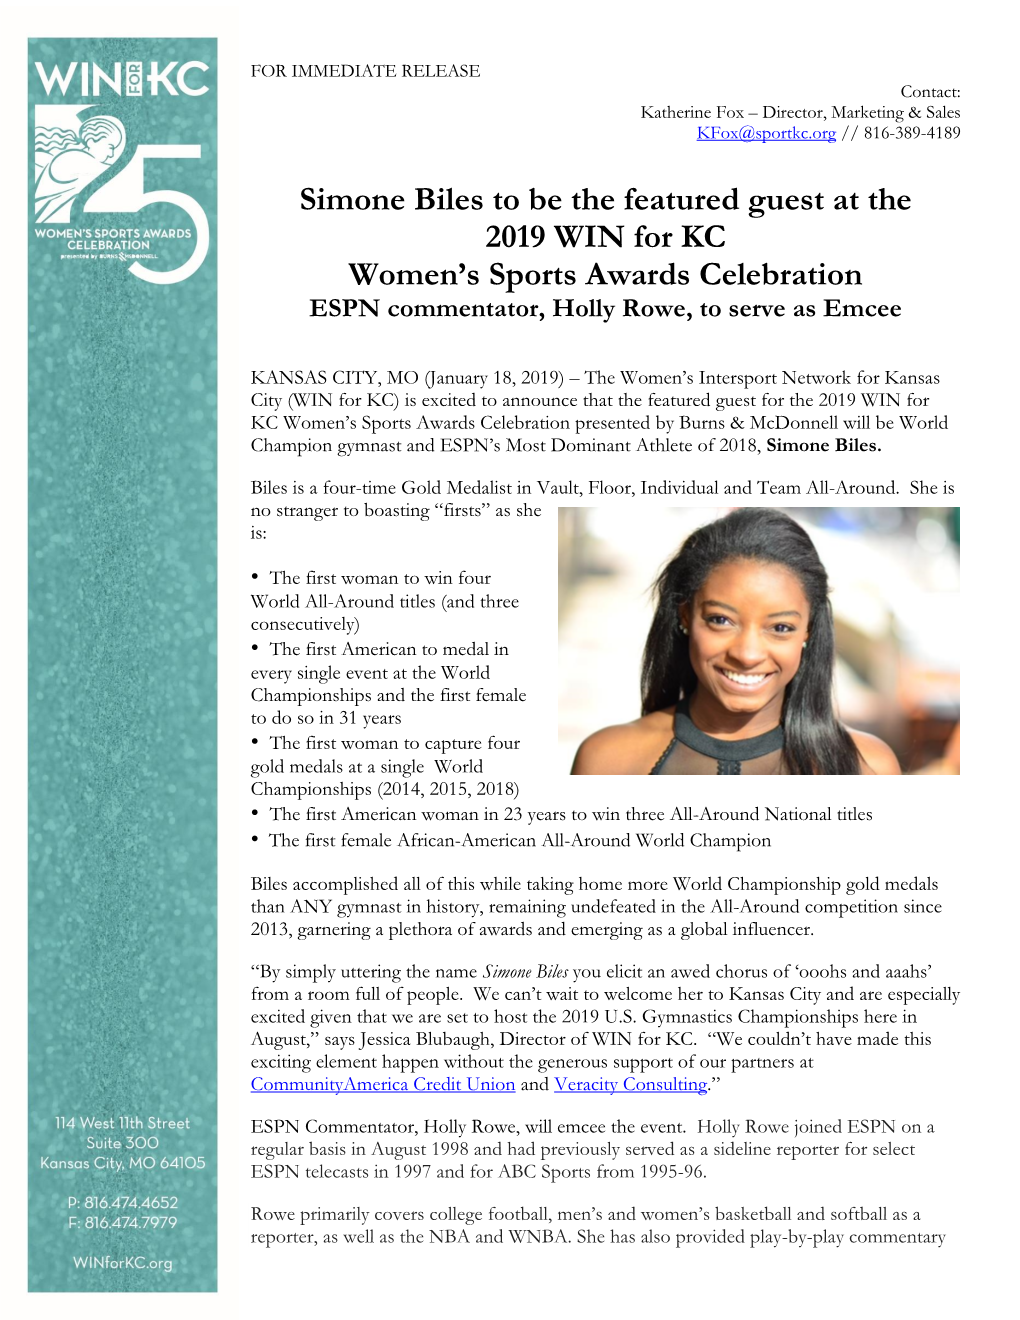 Simone Biles to Be the Featured Guest at the 2019 WIN for KC Women's Sports Awards Celebration